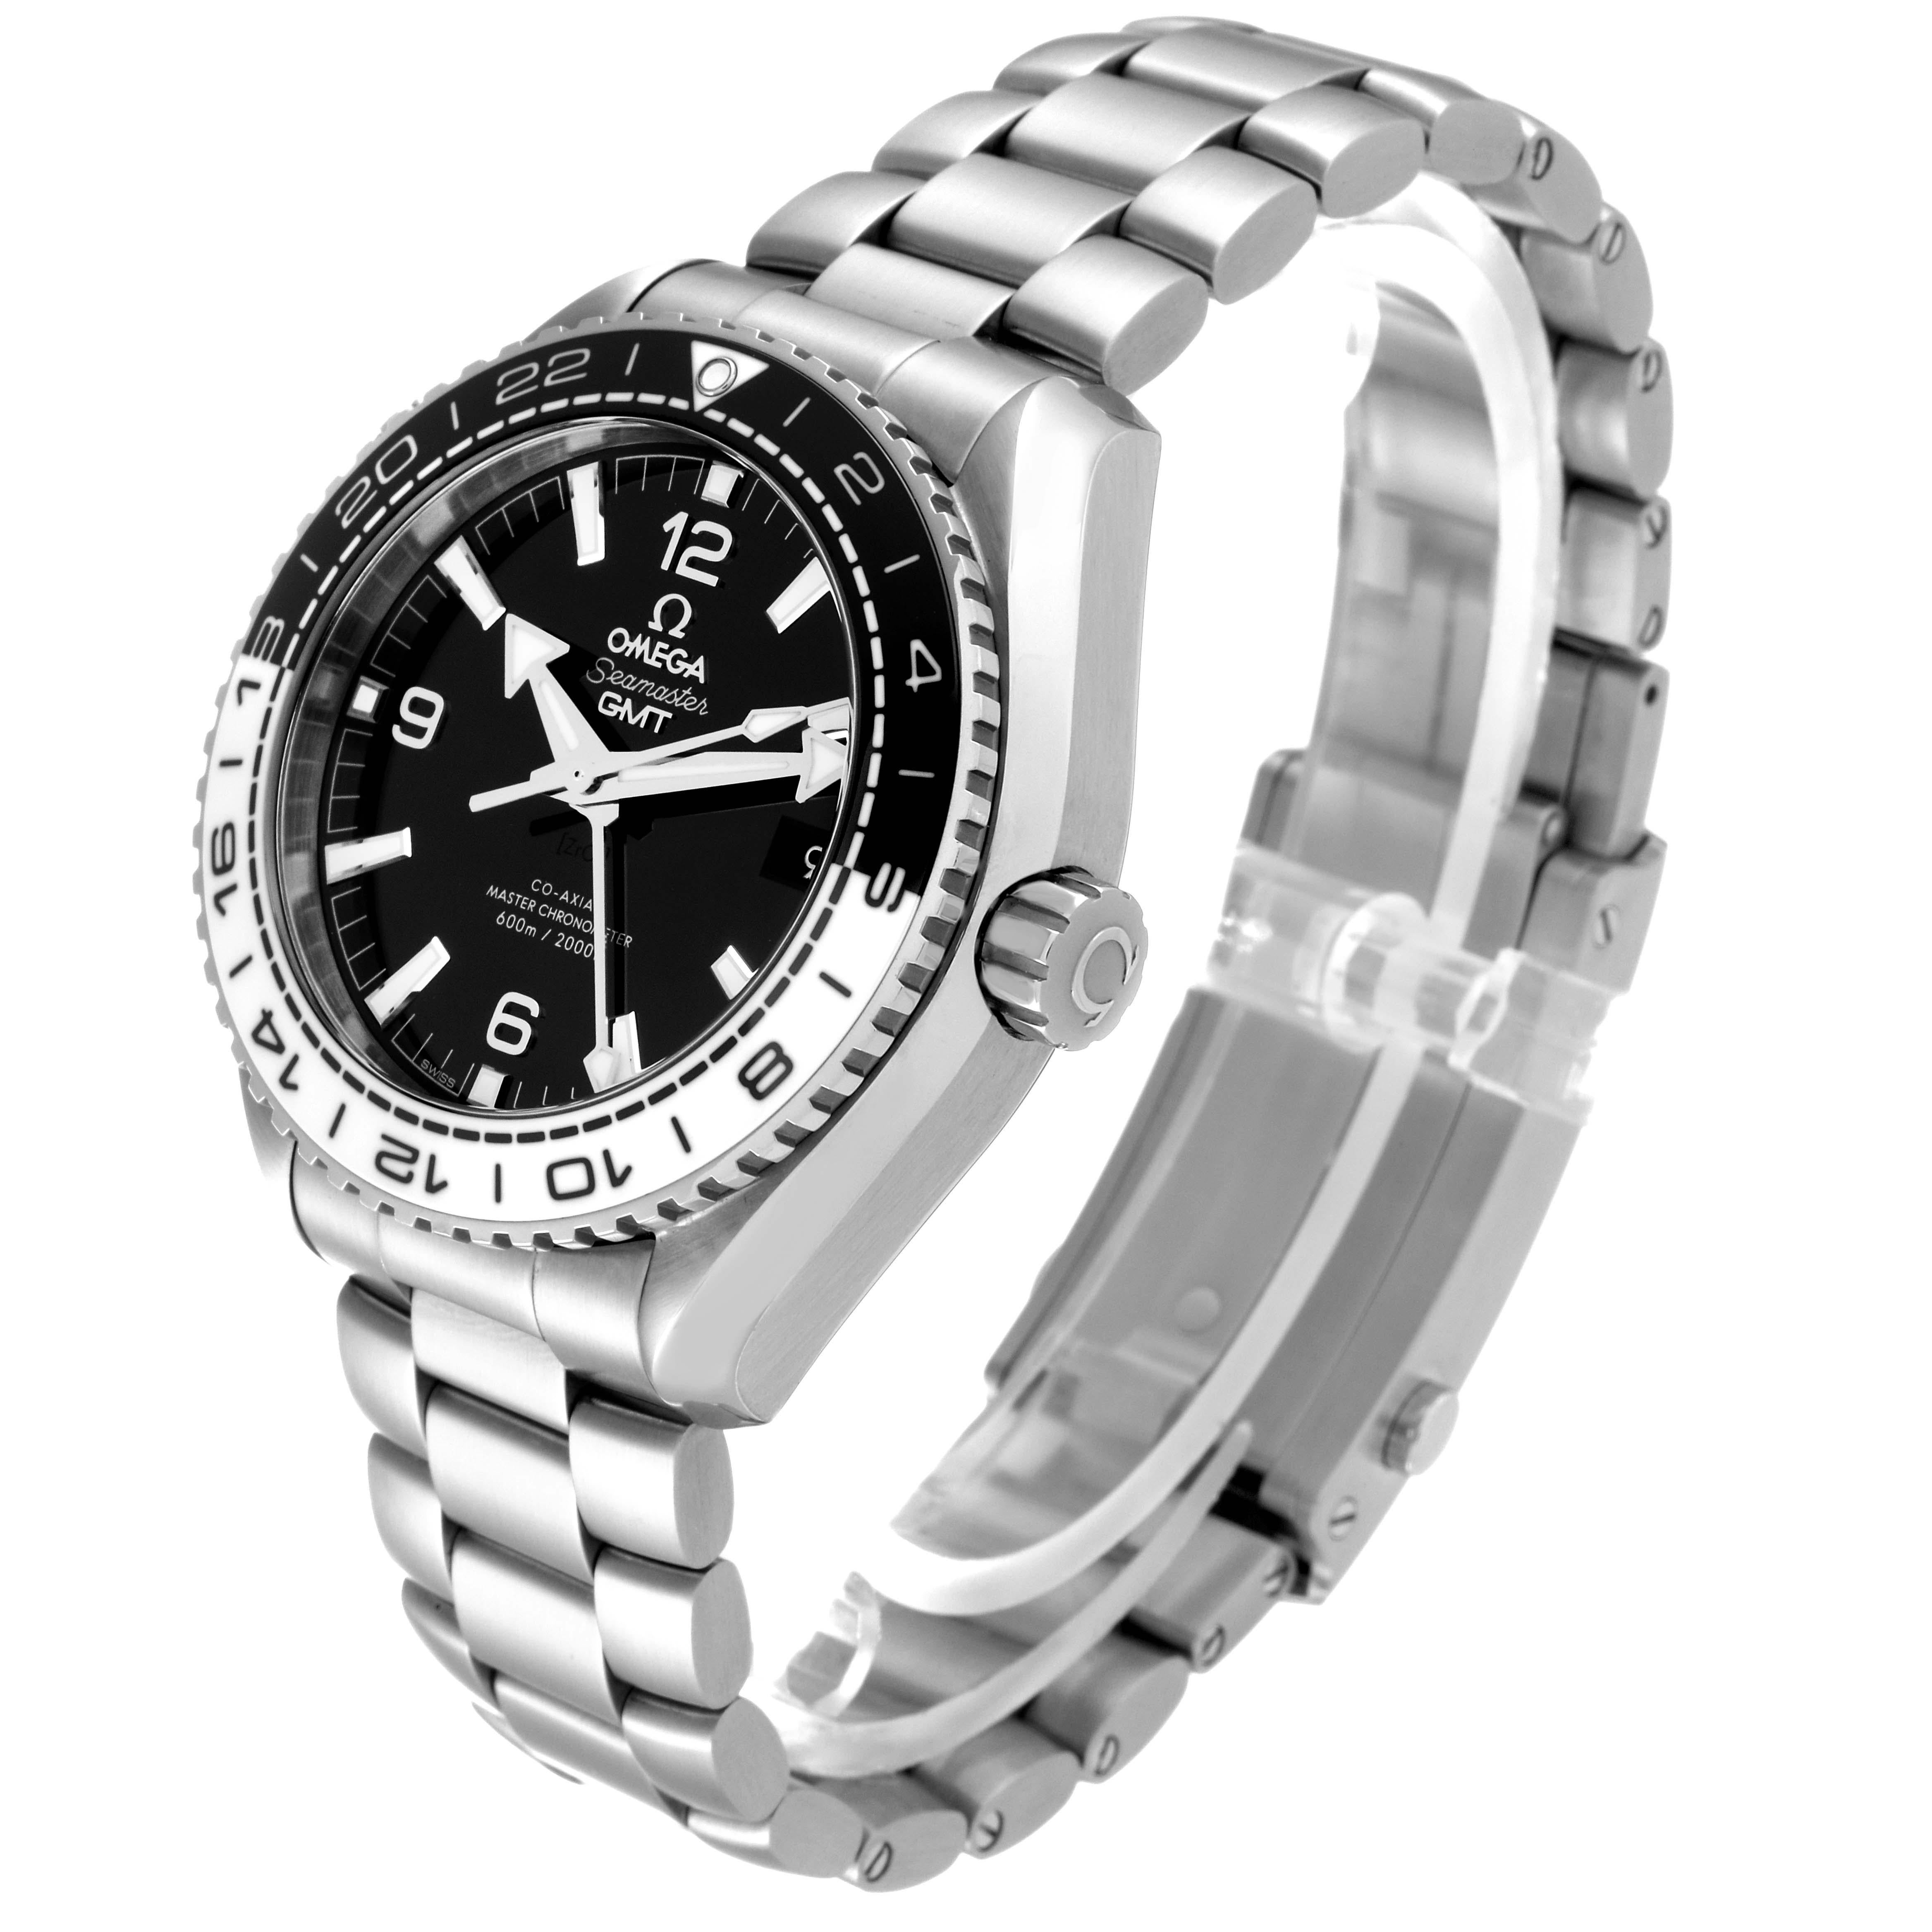 Men's Omega Seamaster Planet Ocean GMT Steel Mens Watch 215.30.44.22.01.001 Box Card For Sale